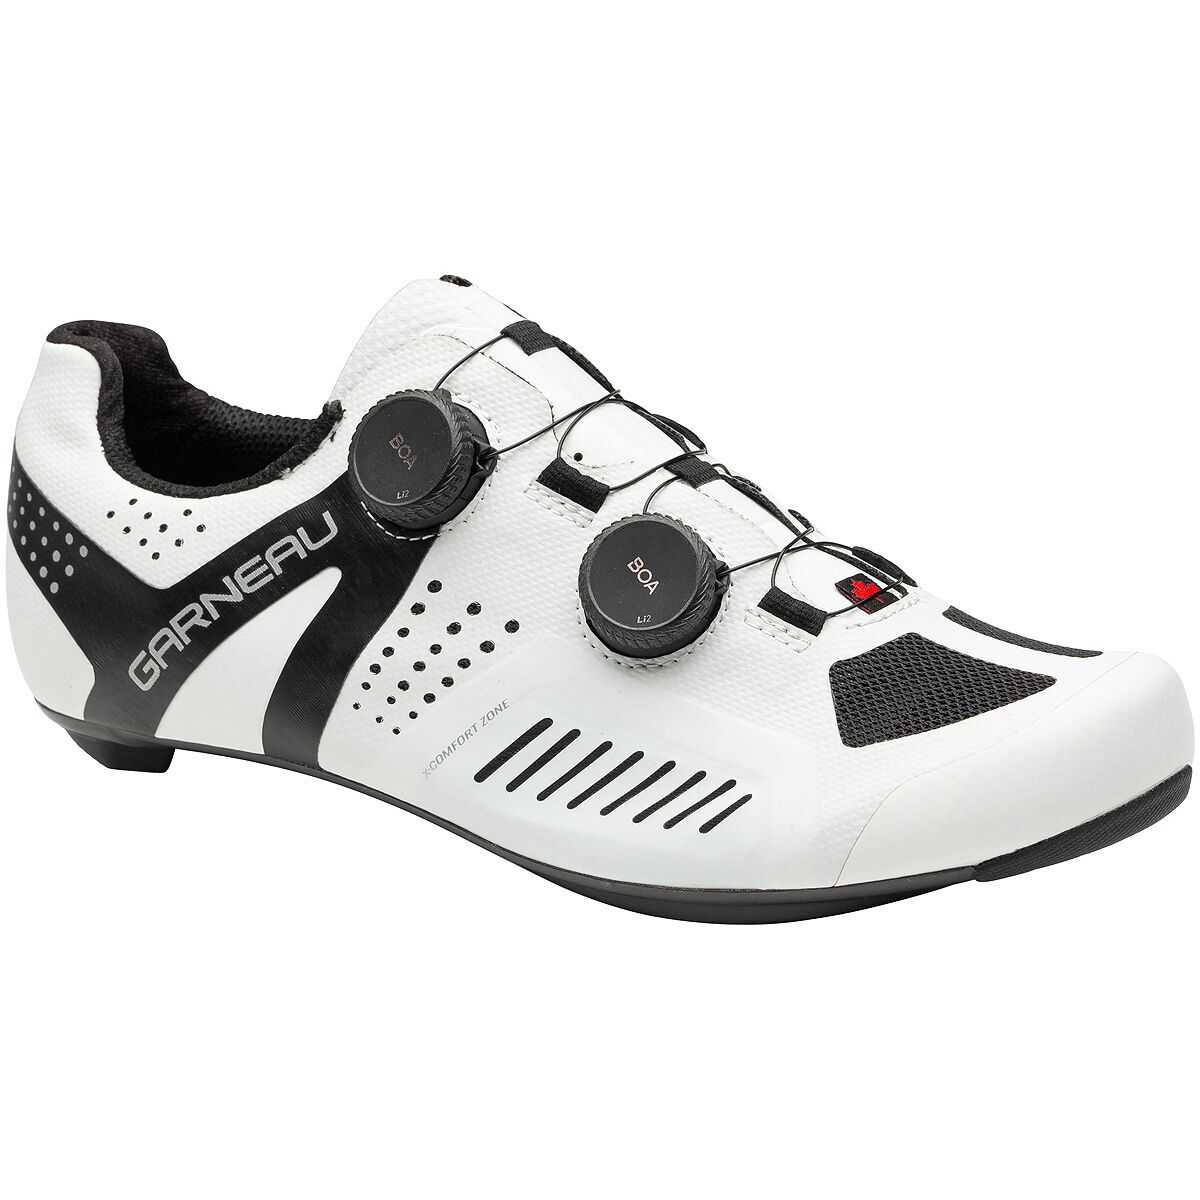 White Used Adult Women's 10.0 Louis Garneau Cycling Shoes